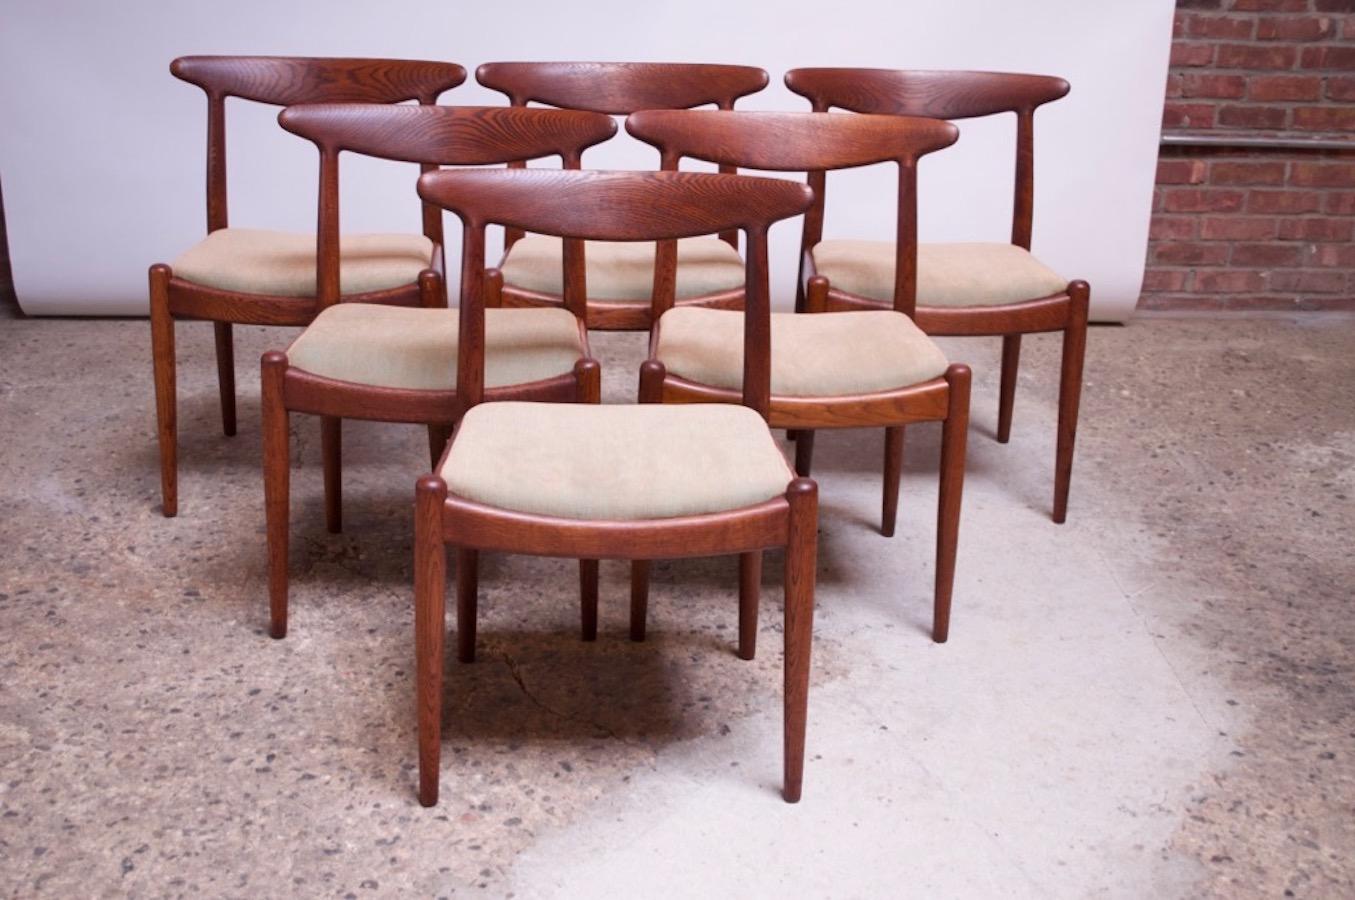 Set of six dining chairs designed in 1953 by Hans Wegner and manufactured by C.M. Madsen in Denmark. Organic, sculptural-form backrests and elegantly tapered legs all in solid, stained oak with vivid grain.
Newly upholstered in a silk fabric in